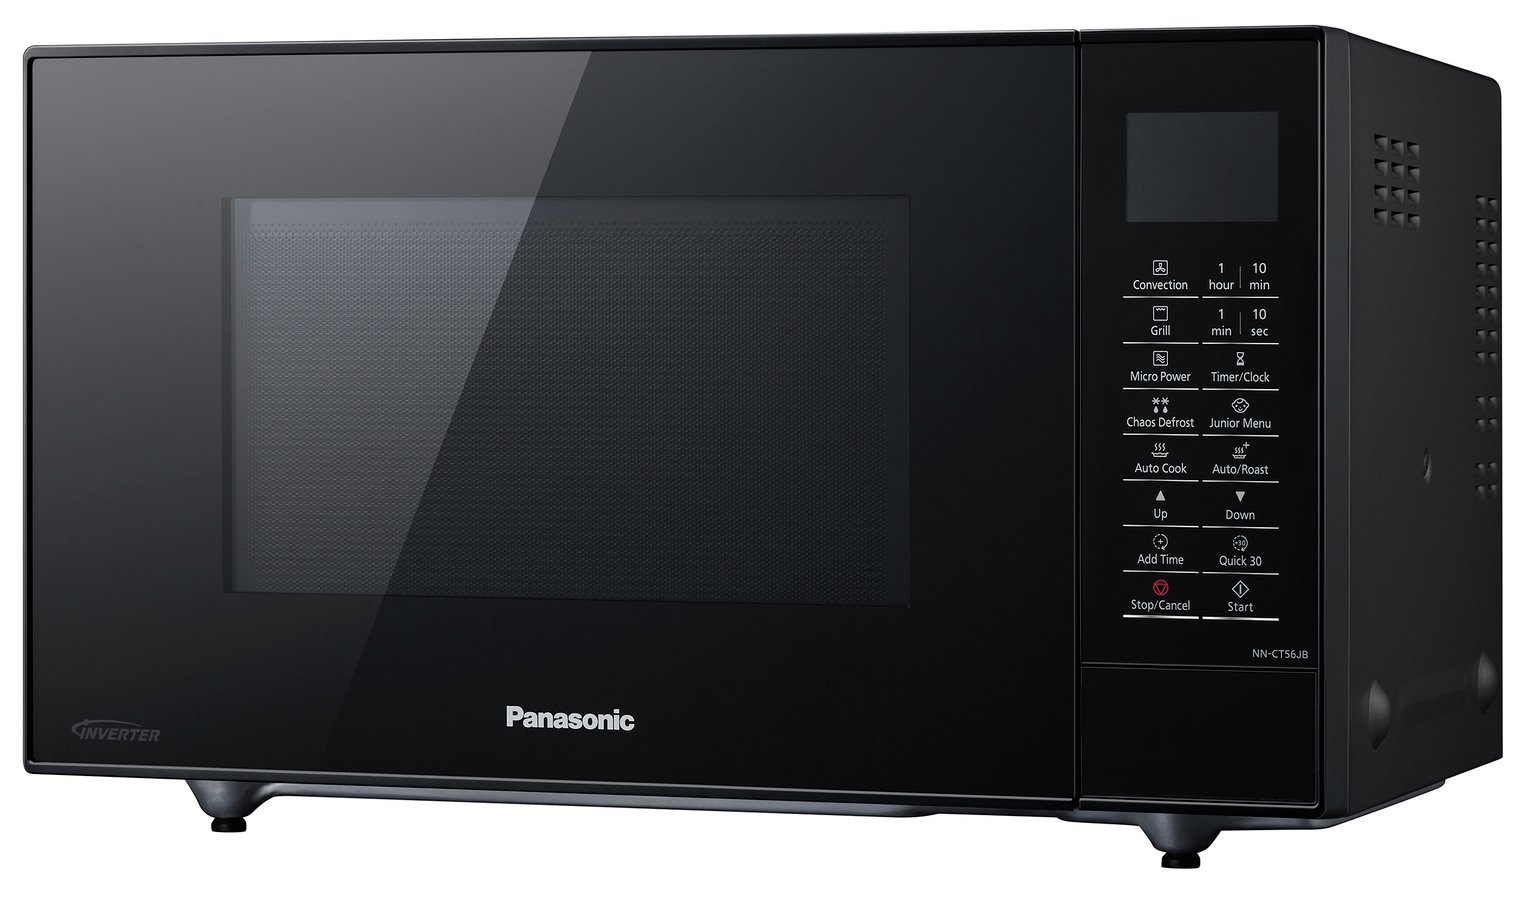 Panasonic 1000W Combination Microwave Oven 27L NN-CT56-Black Review